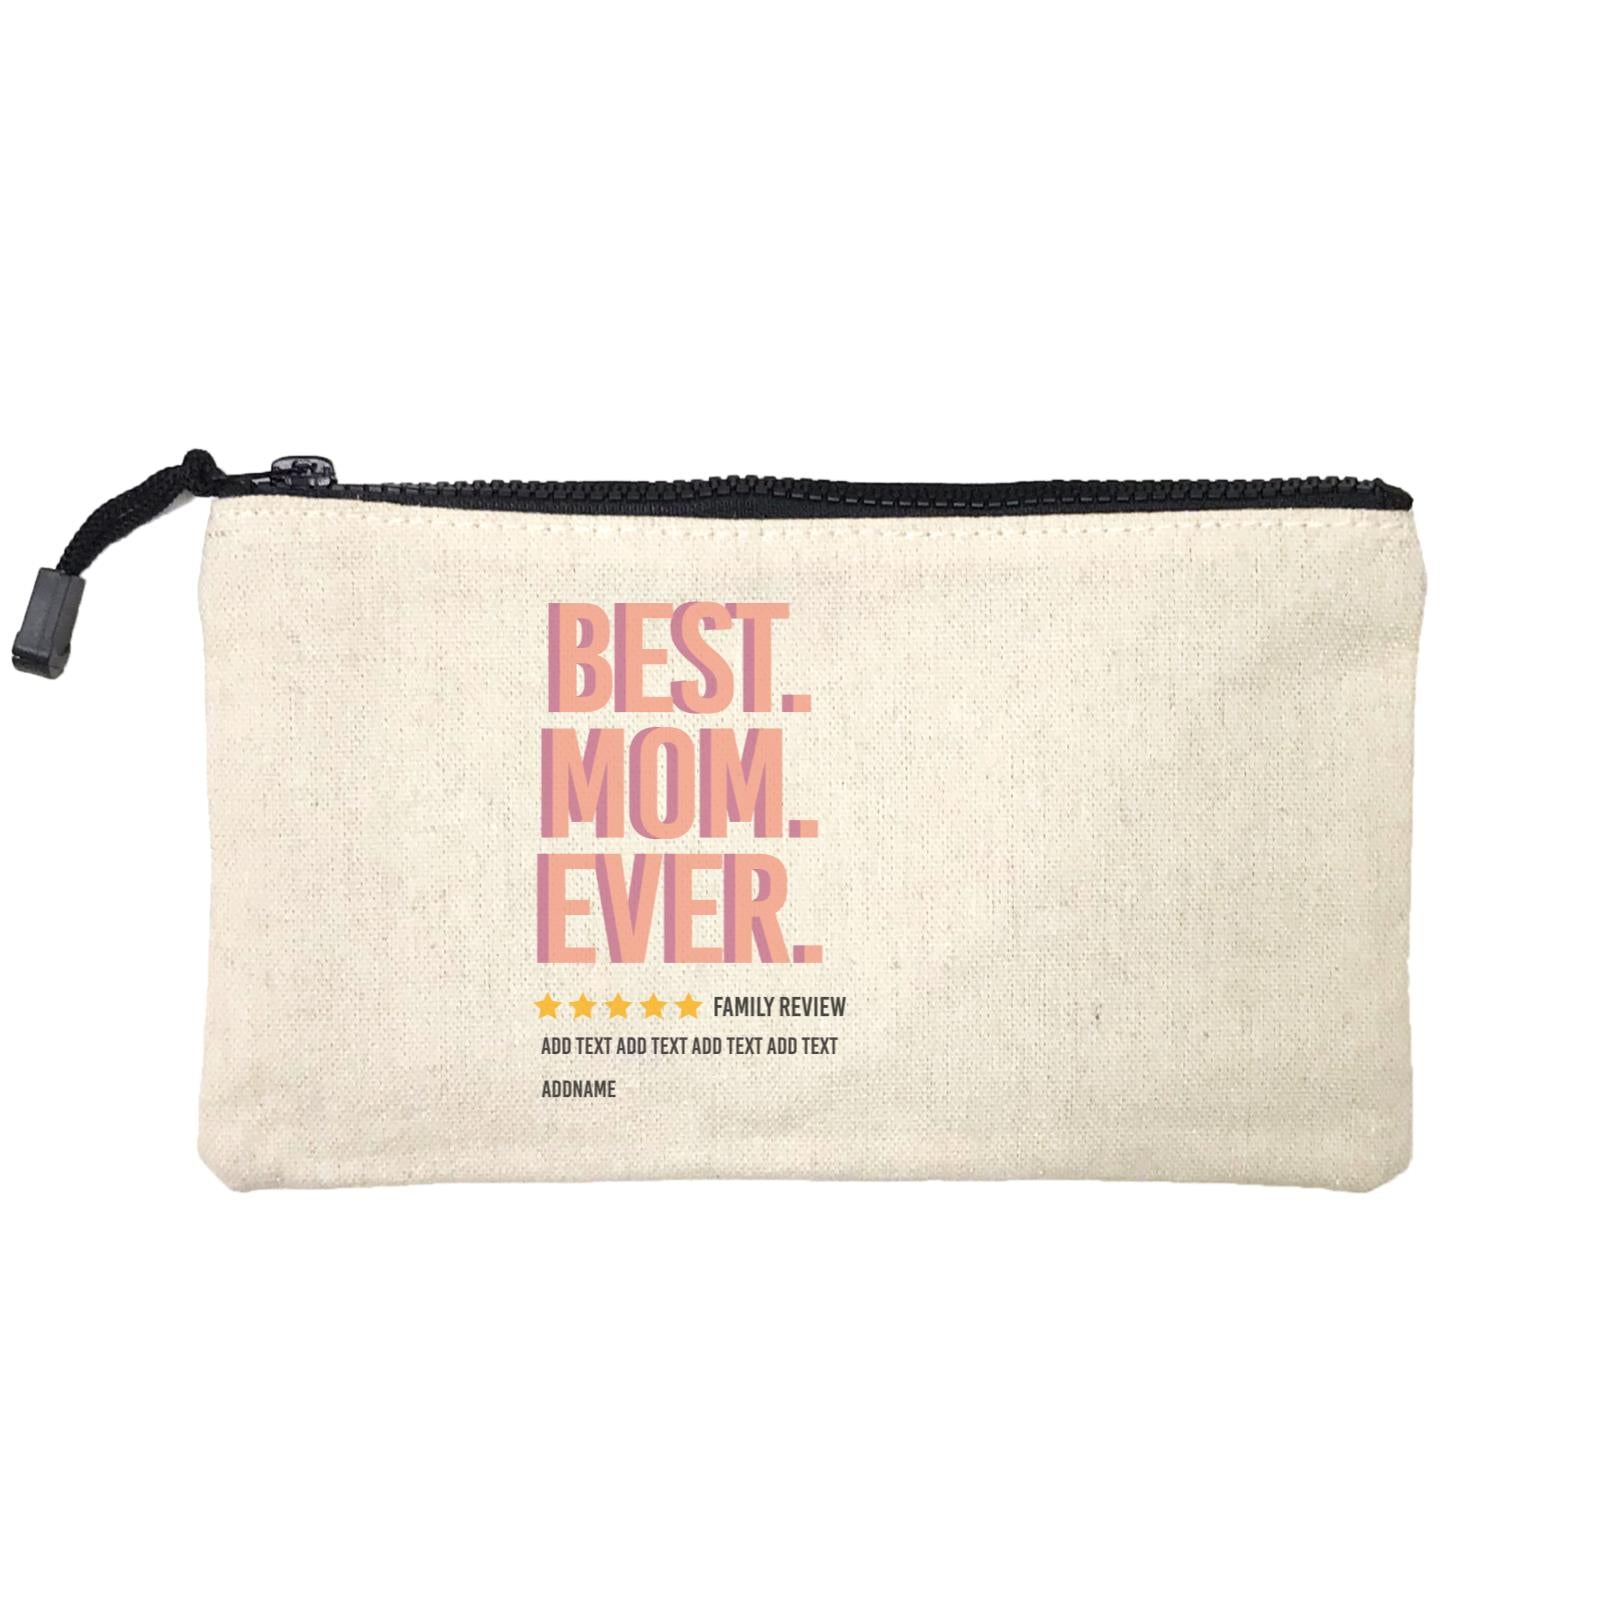 Awesome Mom 1 Best Mom Ever Family Review Add Text And Addname Mini Accessories Stationery Pouch